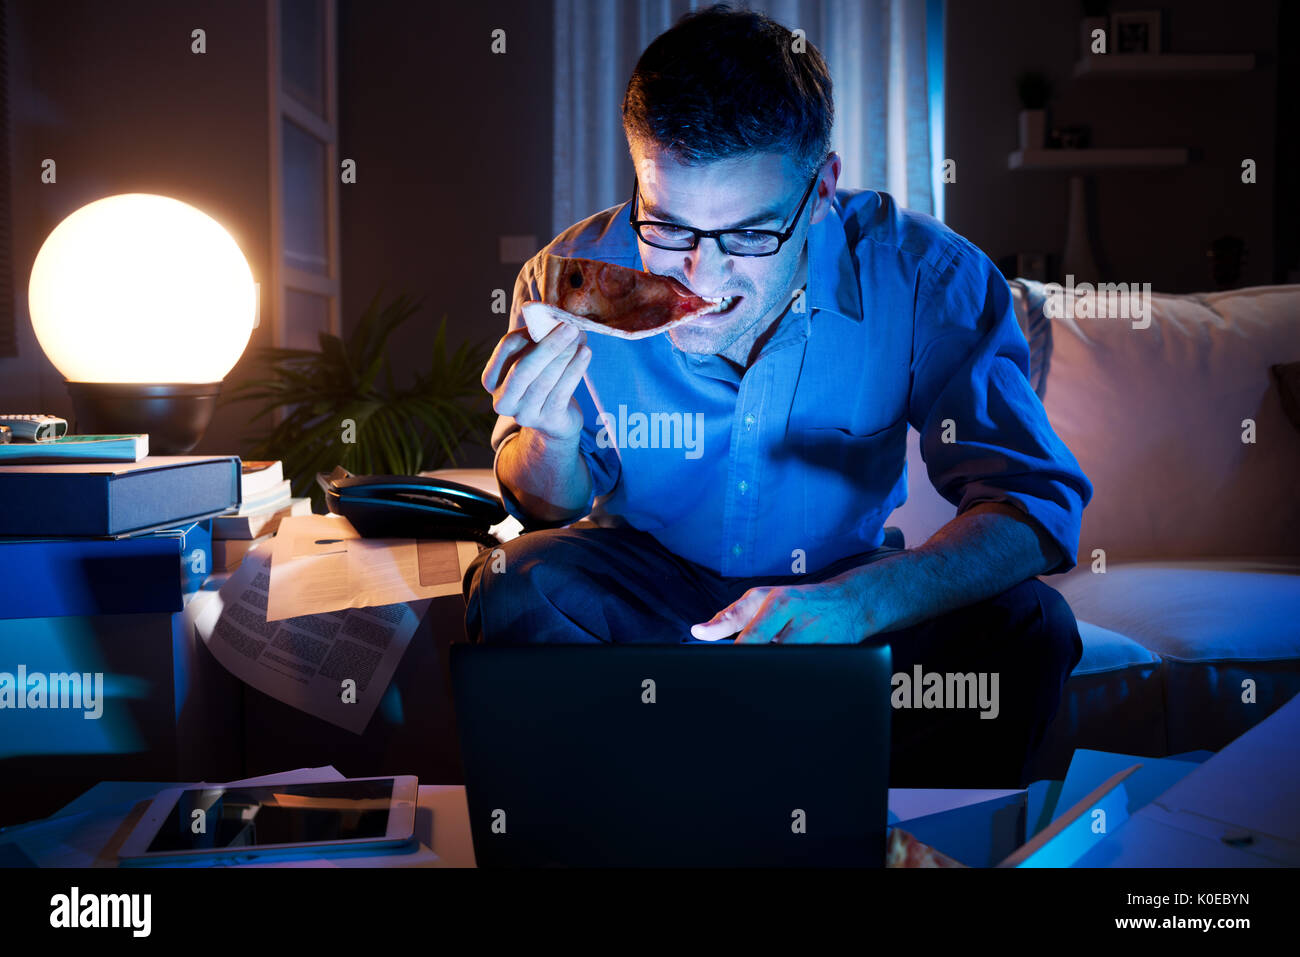 Man eating a slice of pizza and staring at computer screen at home. Stock Photo